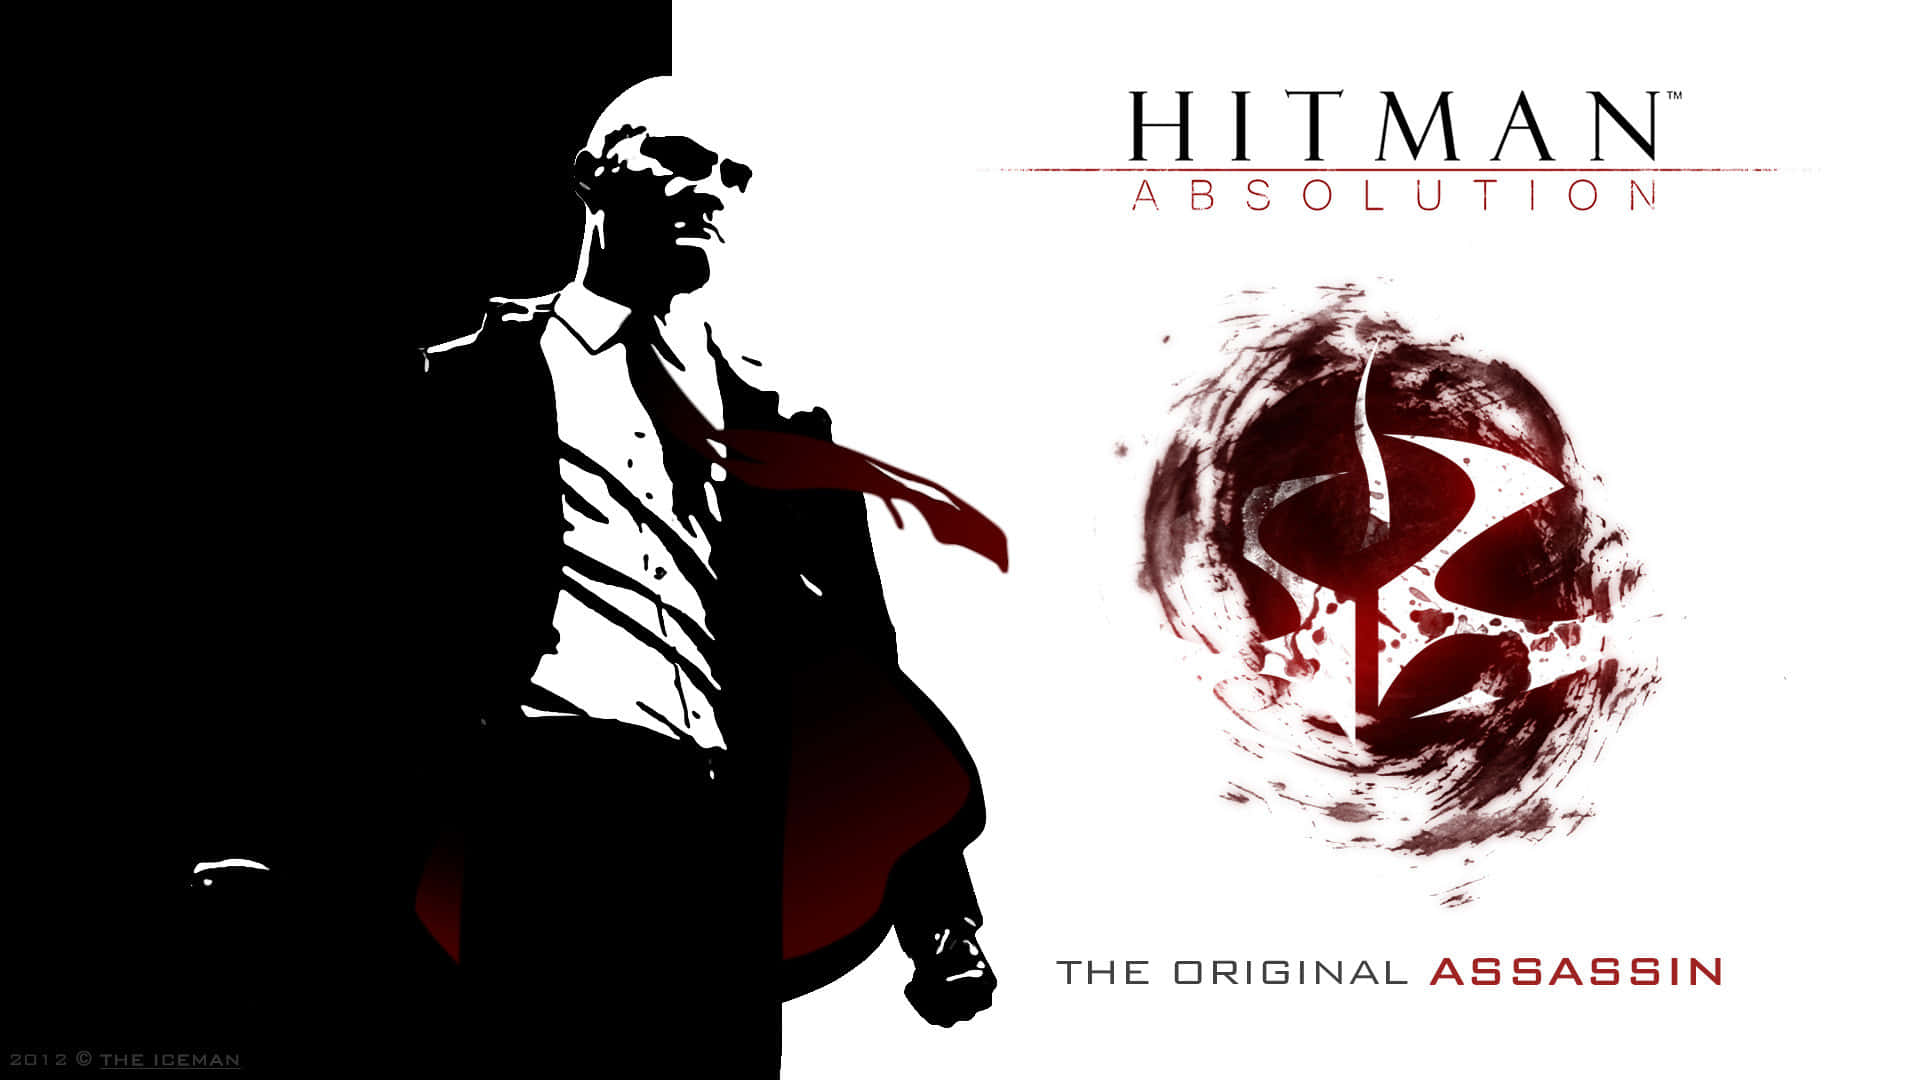 Agent 47 in HD Hitman Absolution